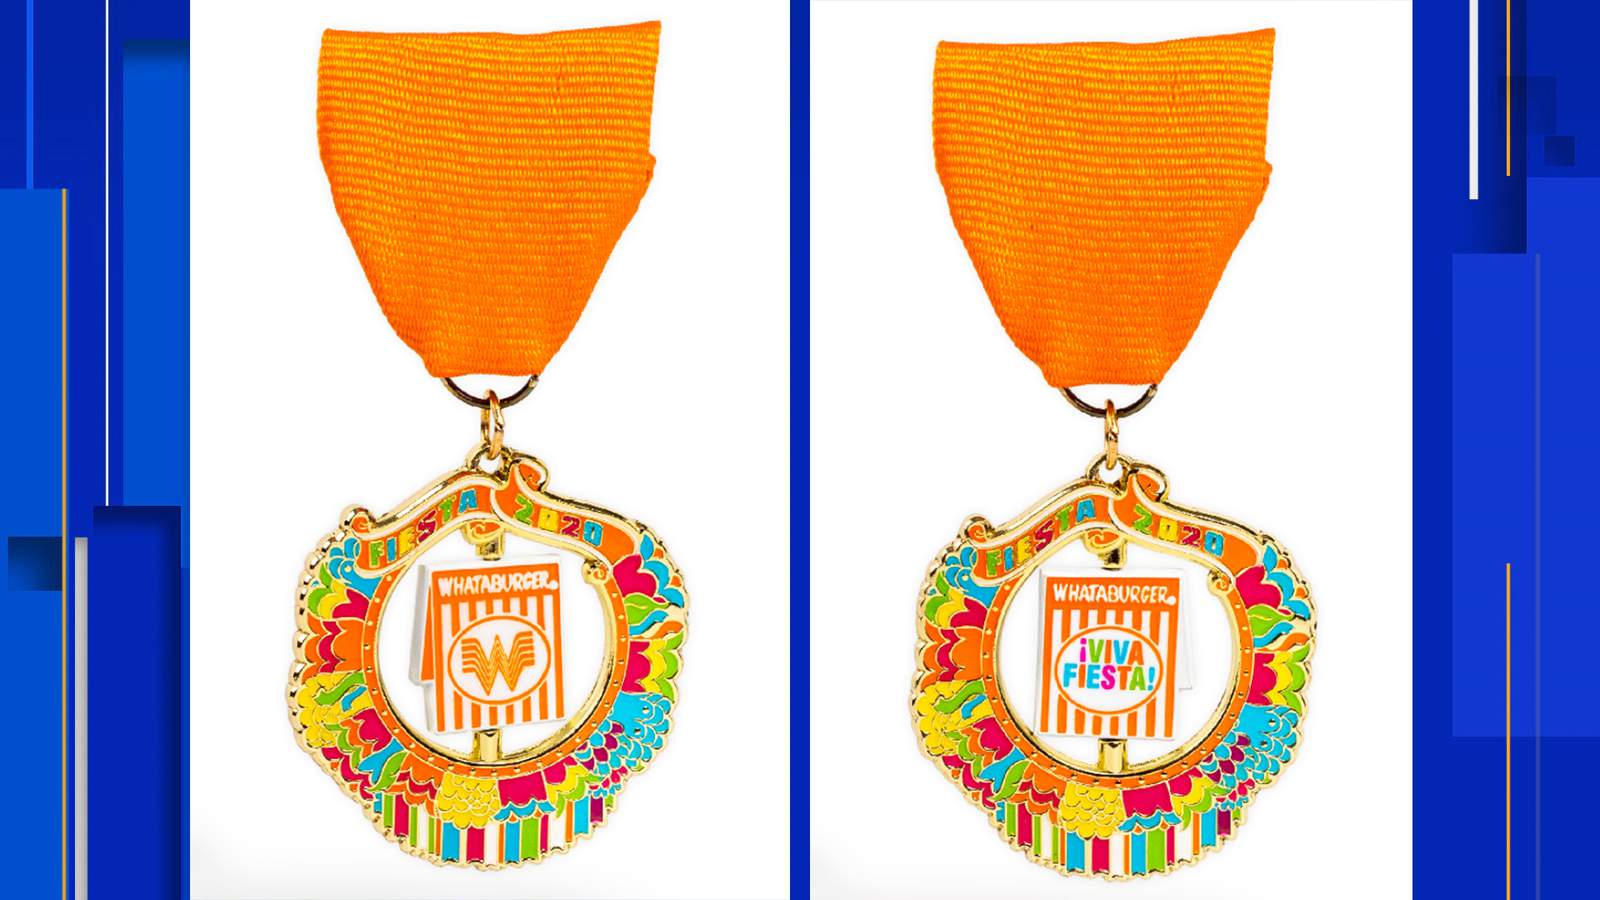 Whataburger’s 2020 Fiesta medal on sale now